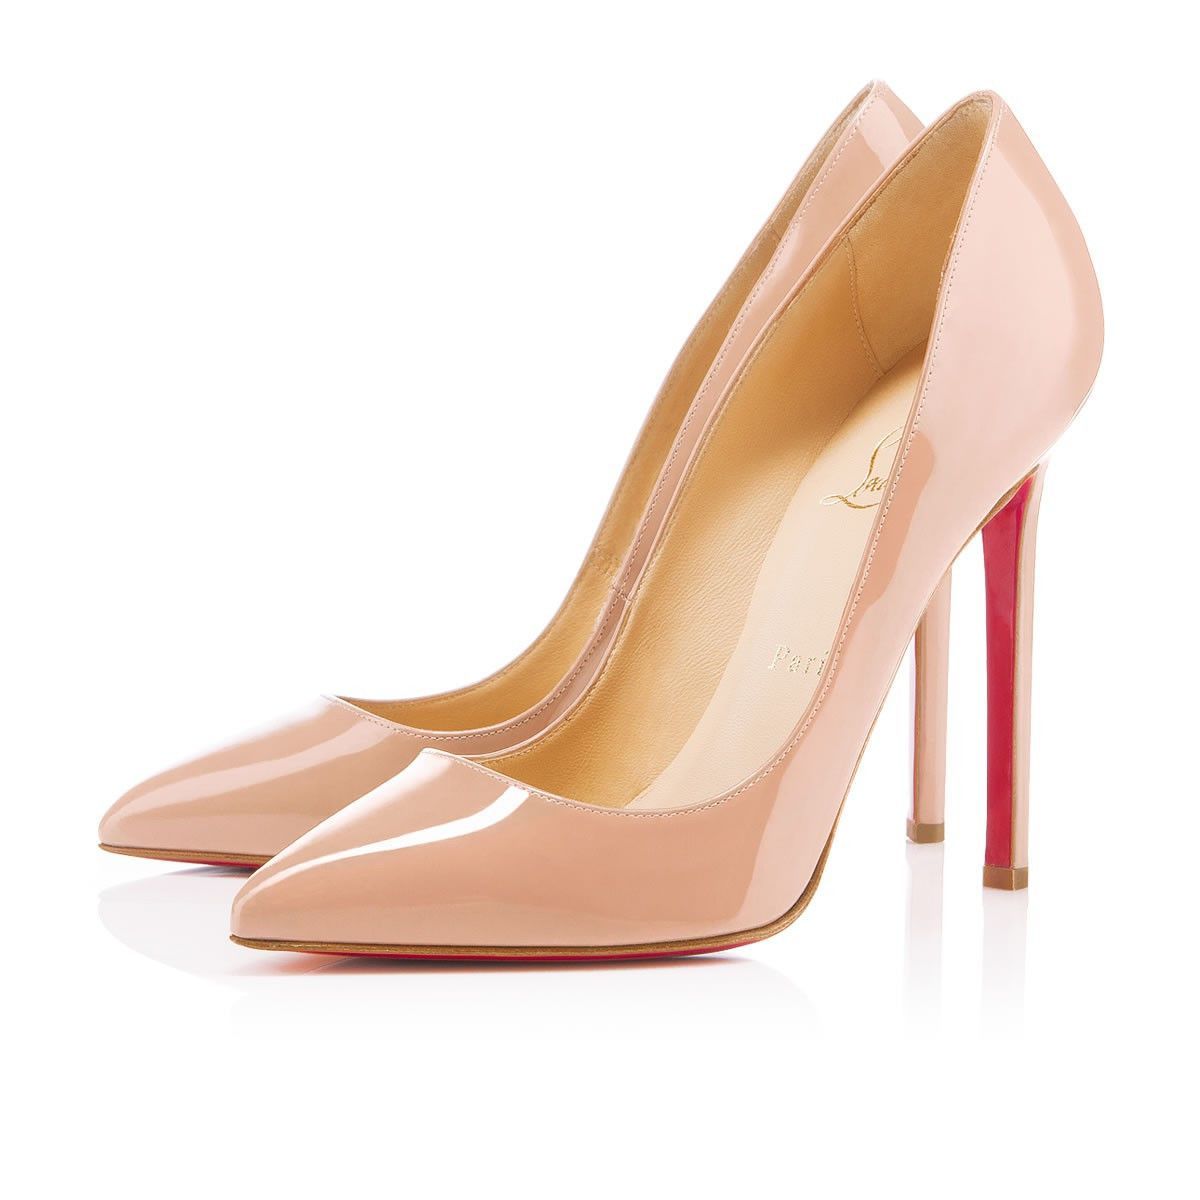 #CL #Louboutin Christian Louboutin Pigalle 120mm Pumps Nude ELR Brings You Happier Life And Makes You Relexed In The Work Time!